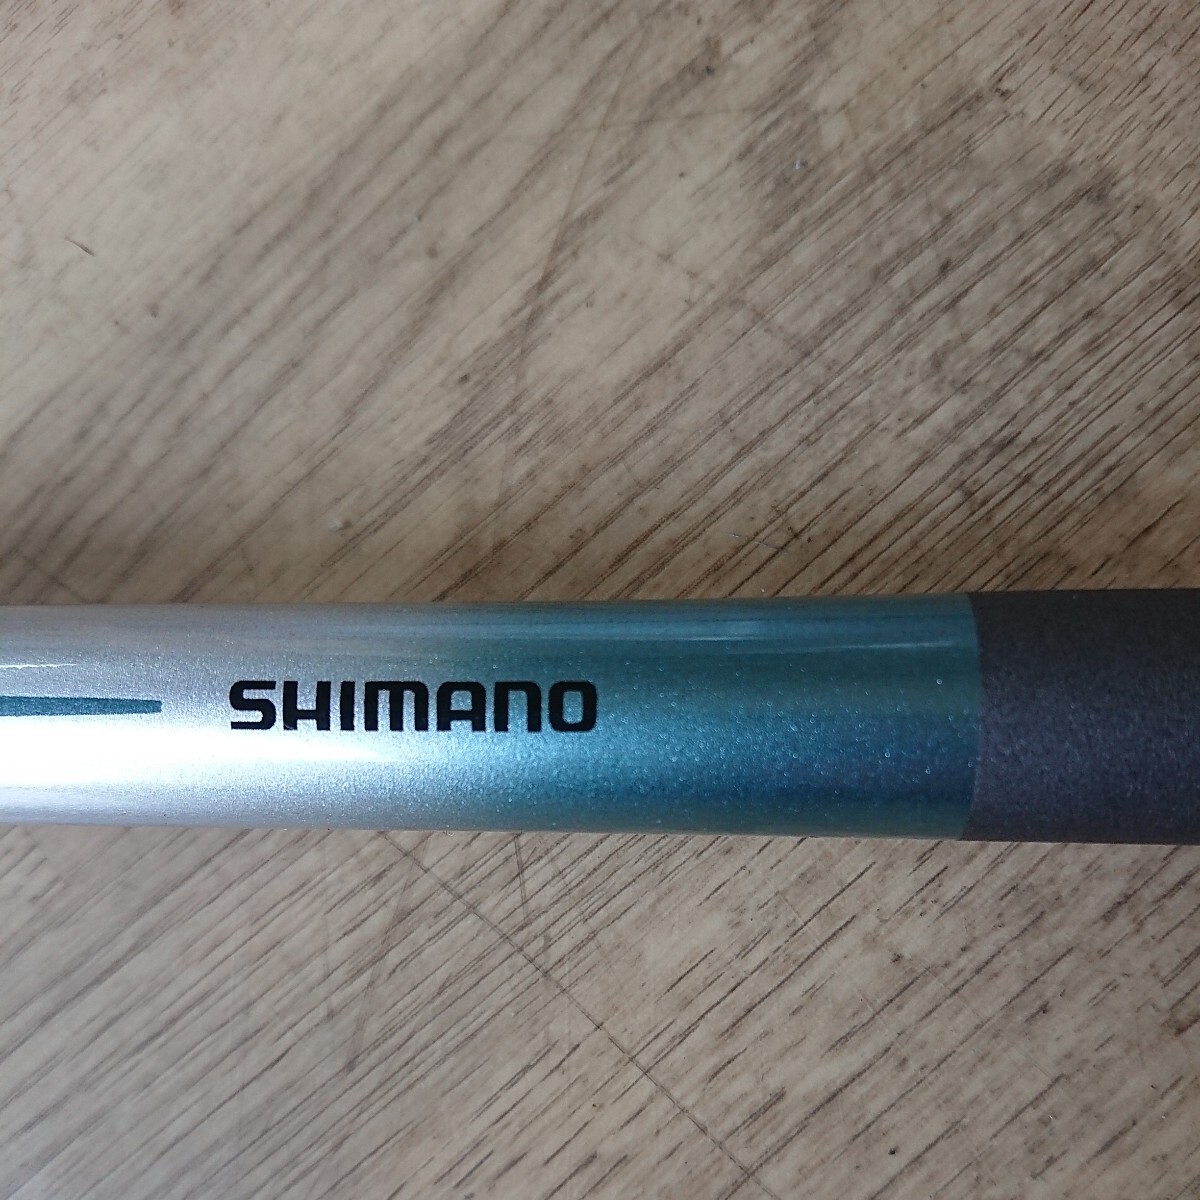 043015 SHImAno HOLIDAY MATE 2-300 釣竿_画像9